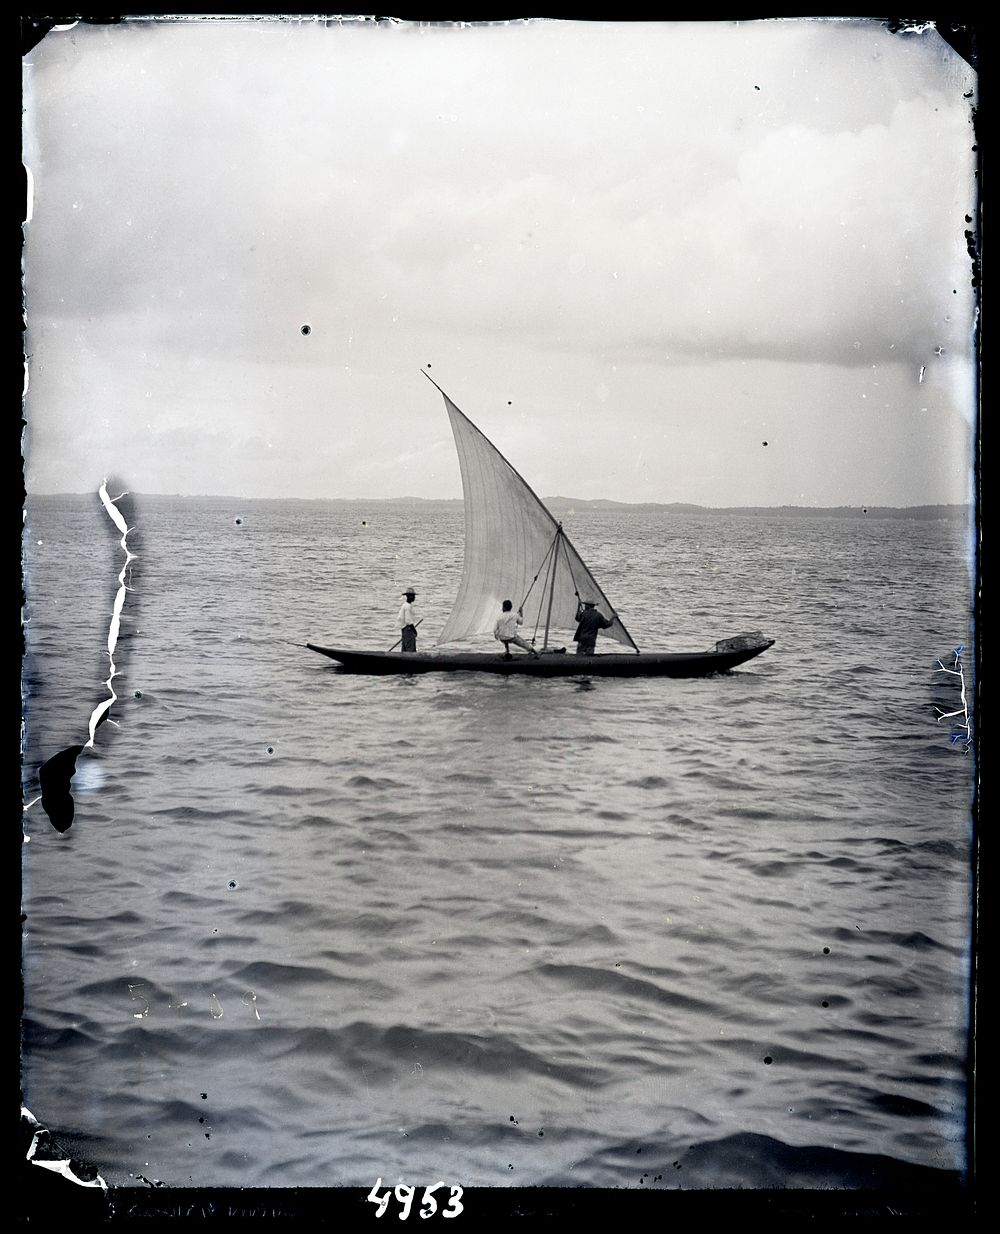 United States Fish Commission Steamer "Albatross" Circumnavigation of South America, 1888